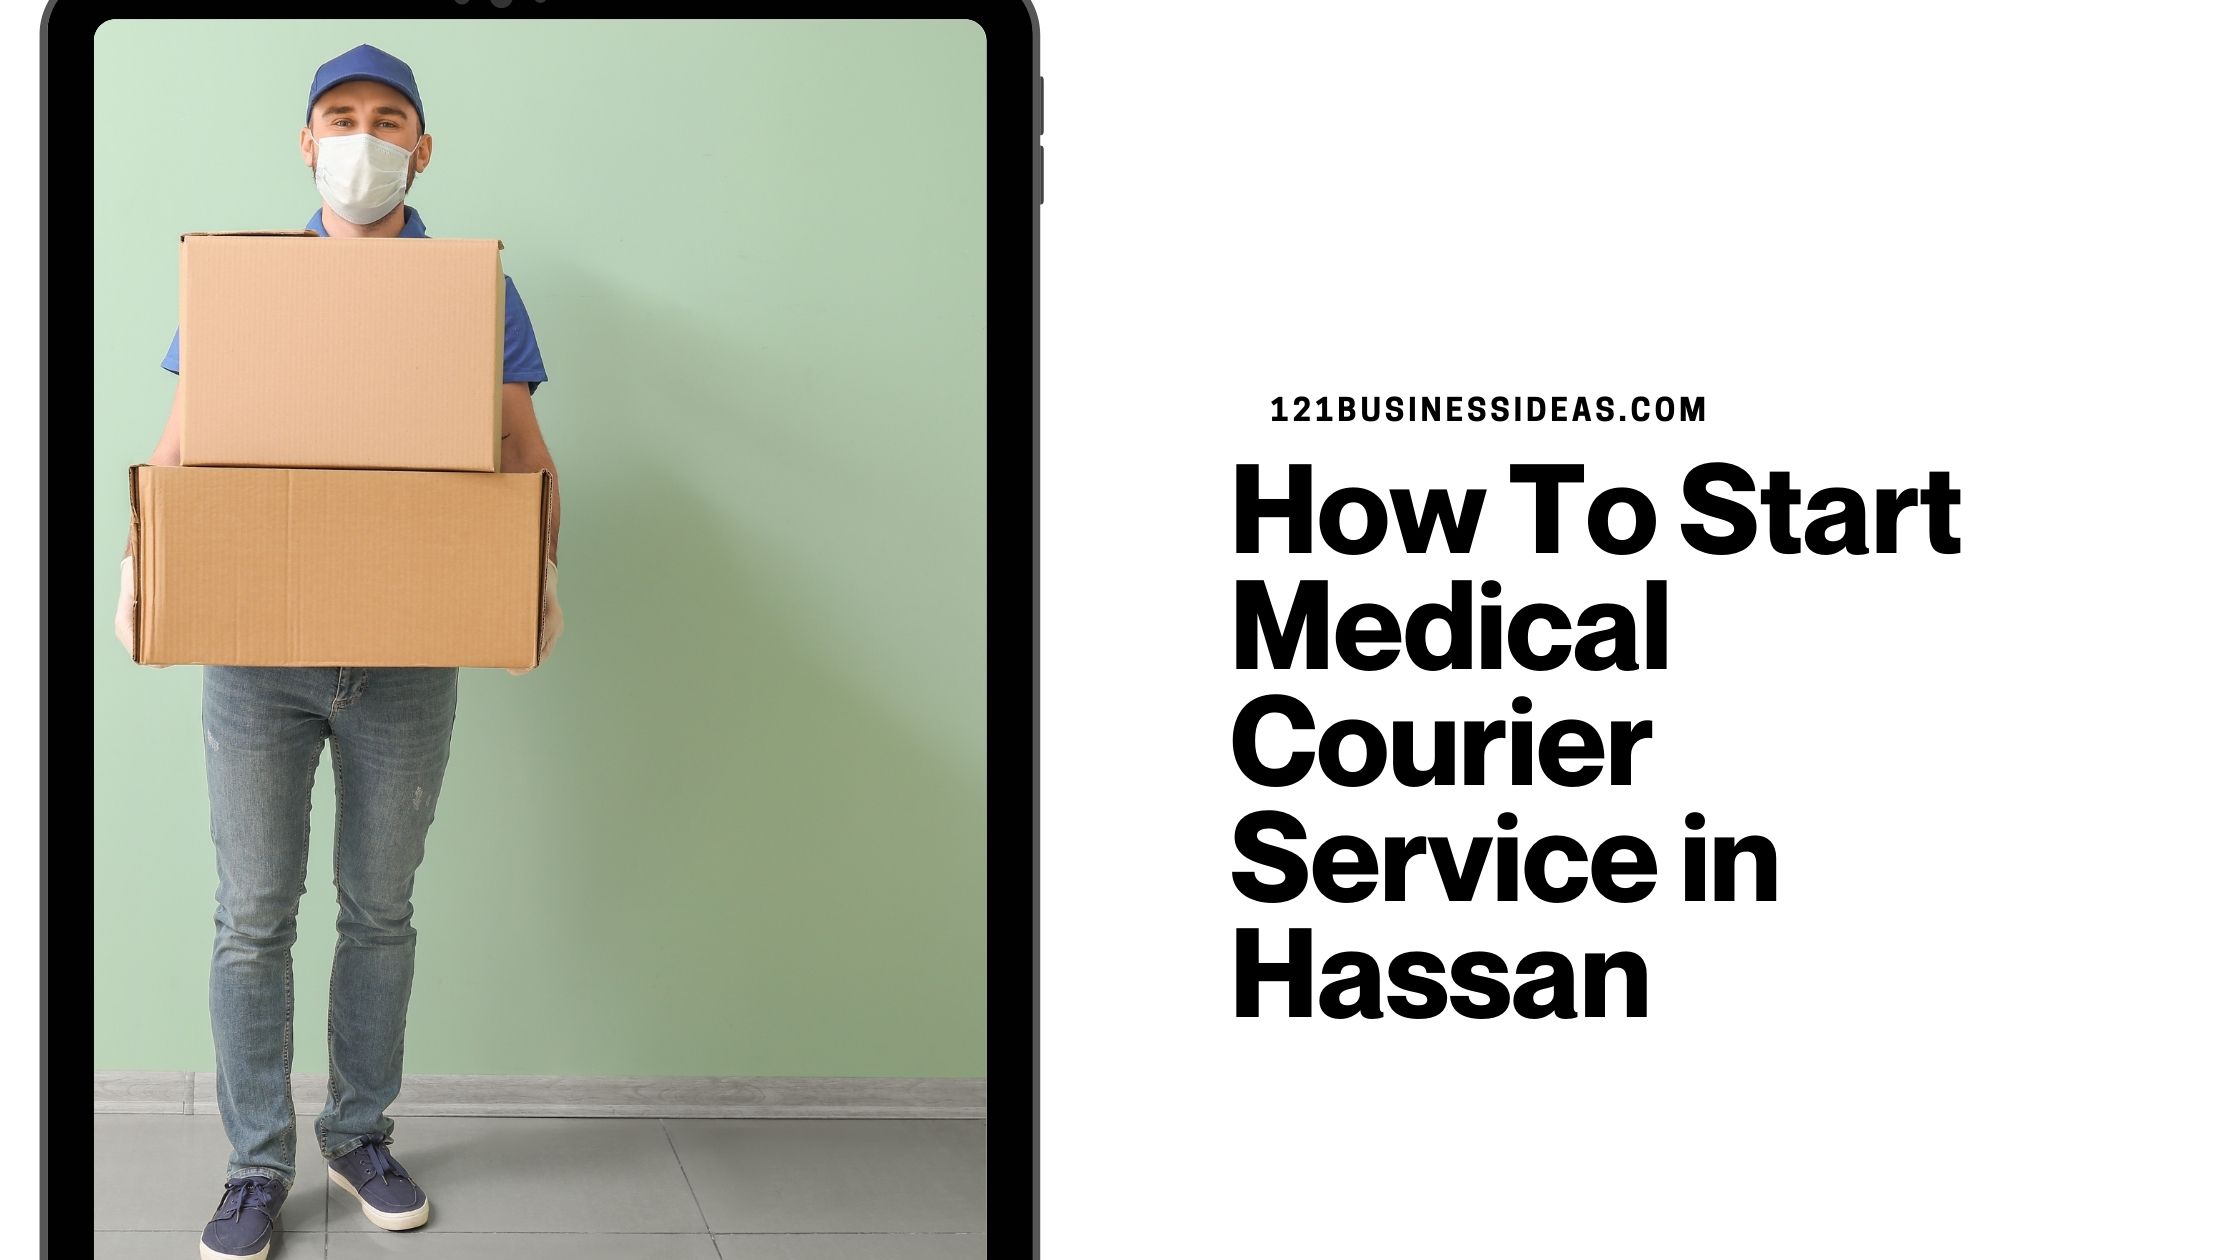 How To Start Medical Courier Service in Hassan